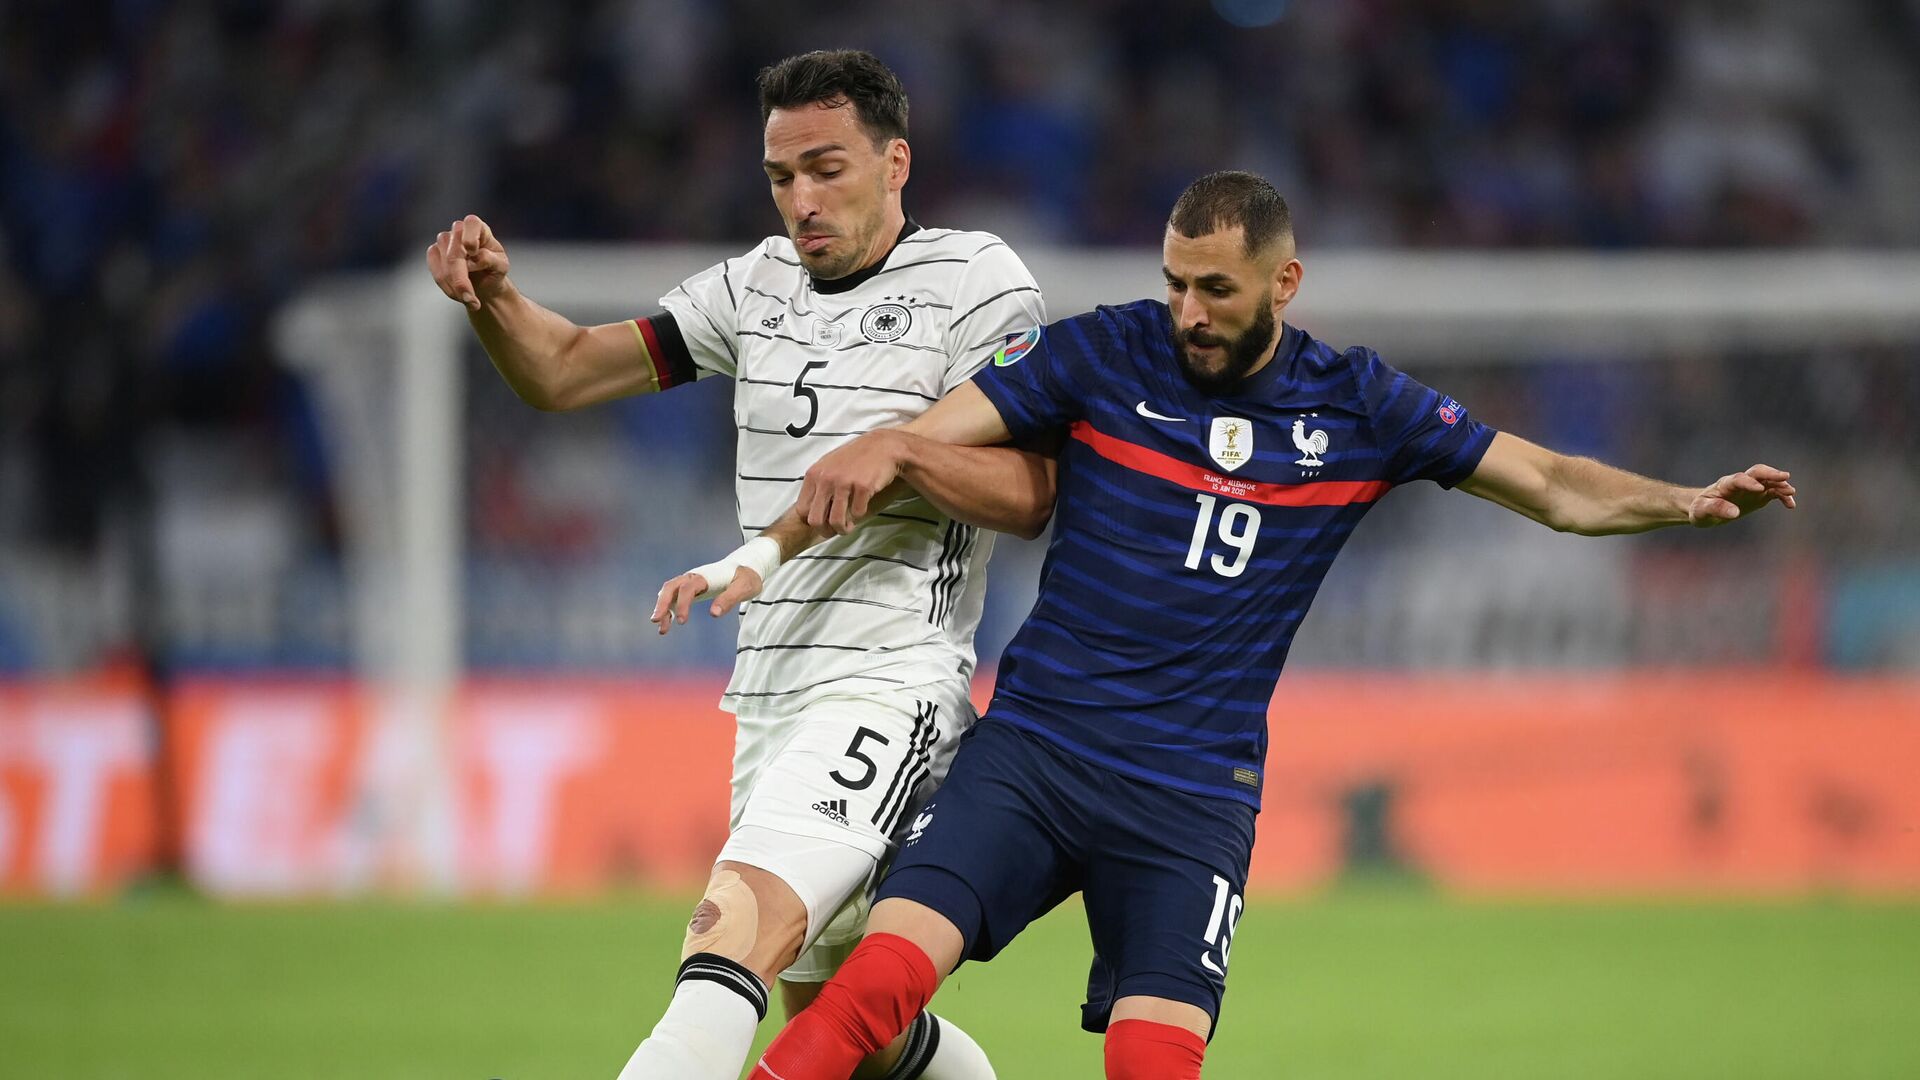 Soccer Football - Euro 2020 - Group F - France v Germany - Football Arena Munich, Munich, Germany - June 15, 2021 France's Karim Benzema in action with Germany's Mats Hummels Pool via REUTERS/Matthias Hangst - РИА Новости, 1920, 15.06.2021